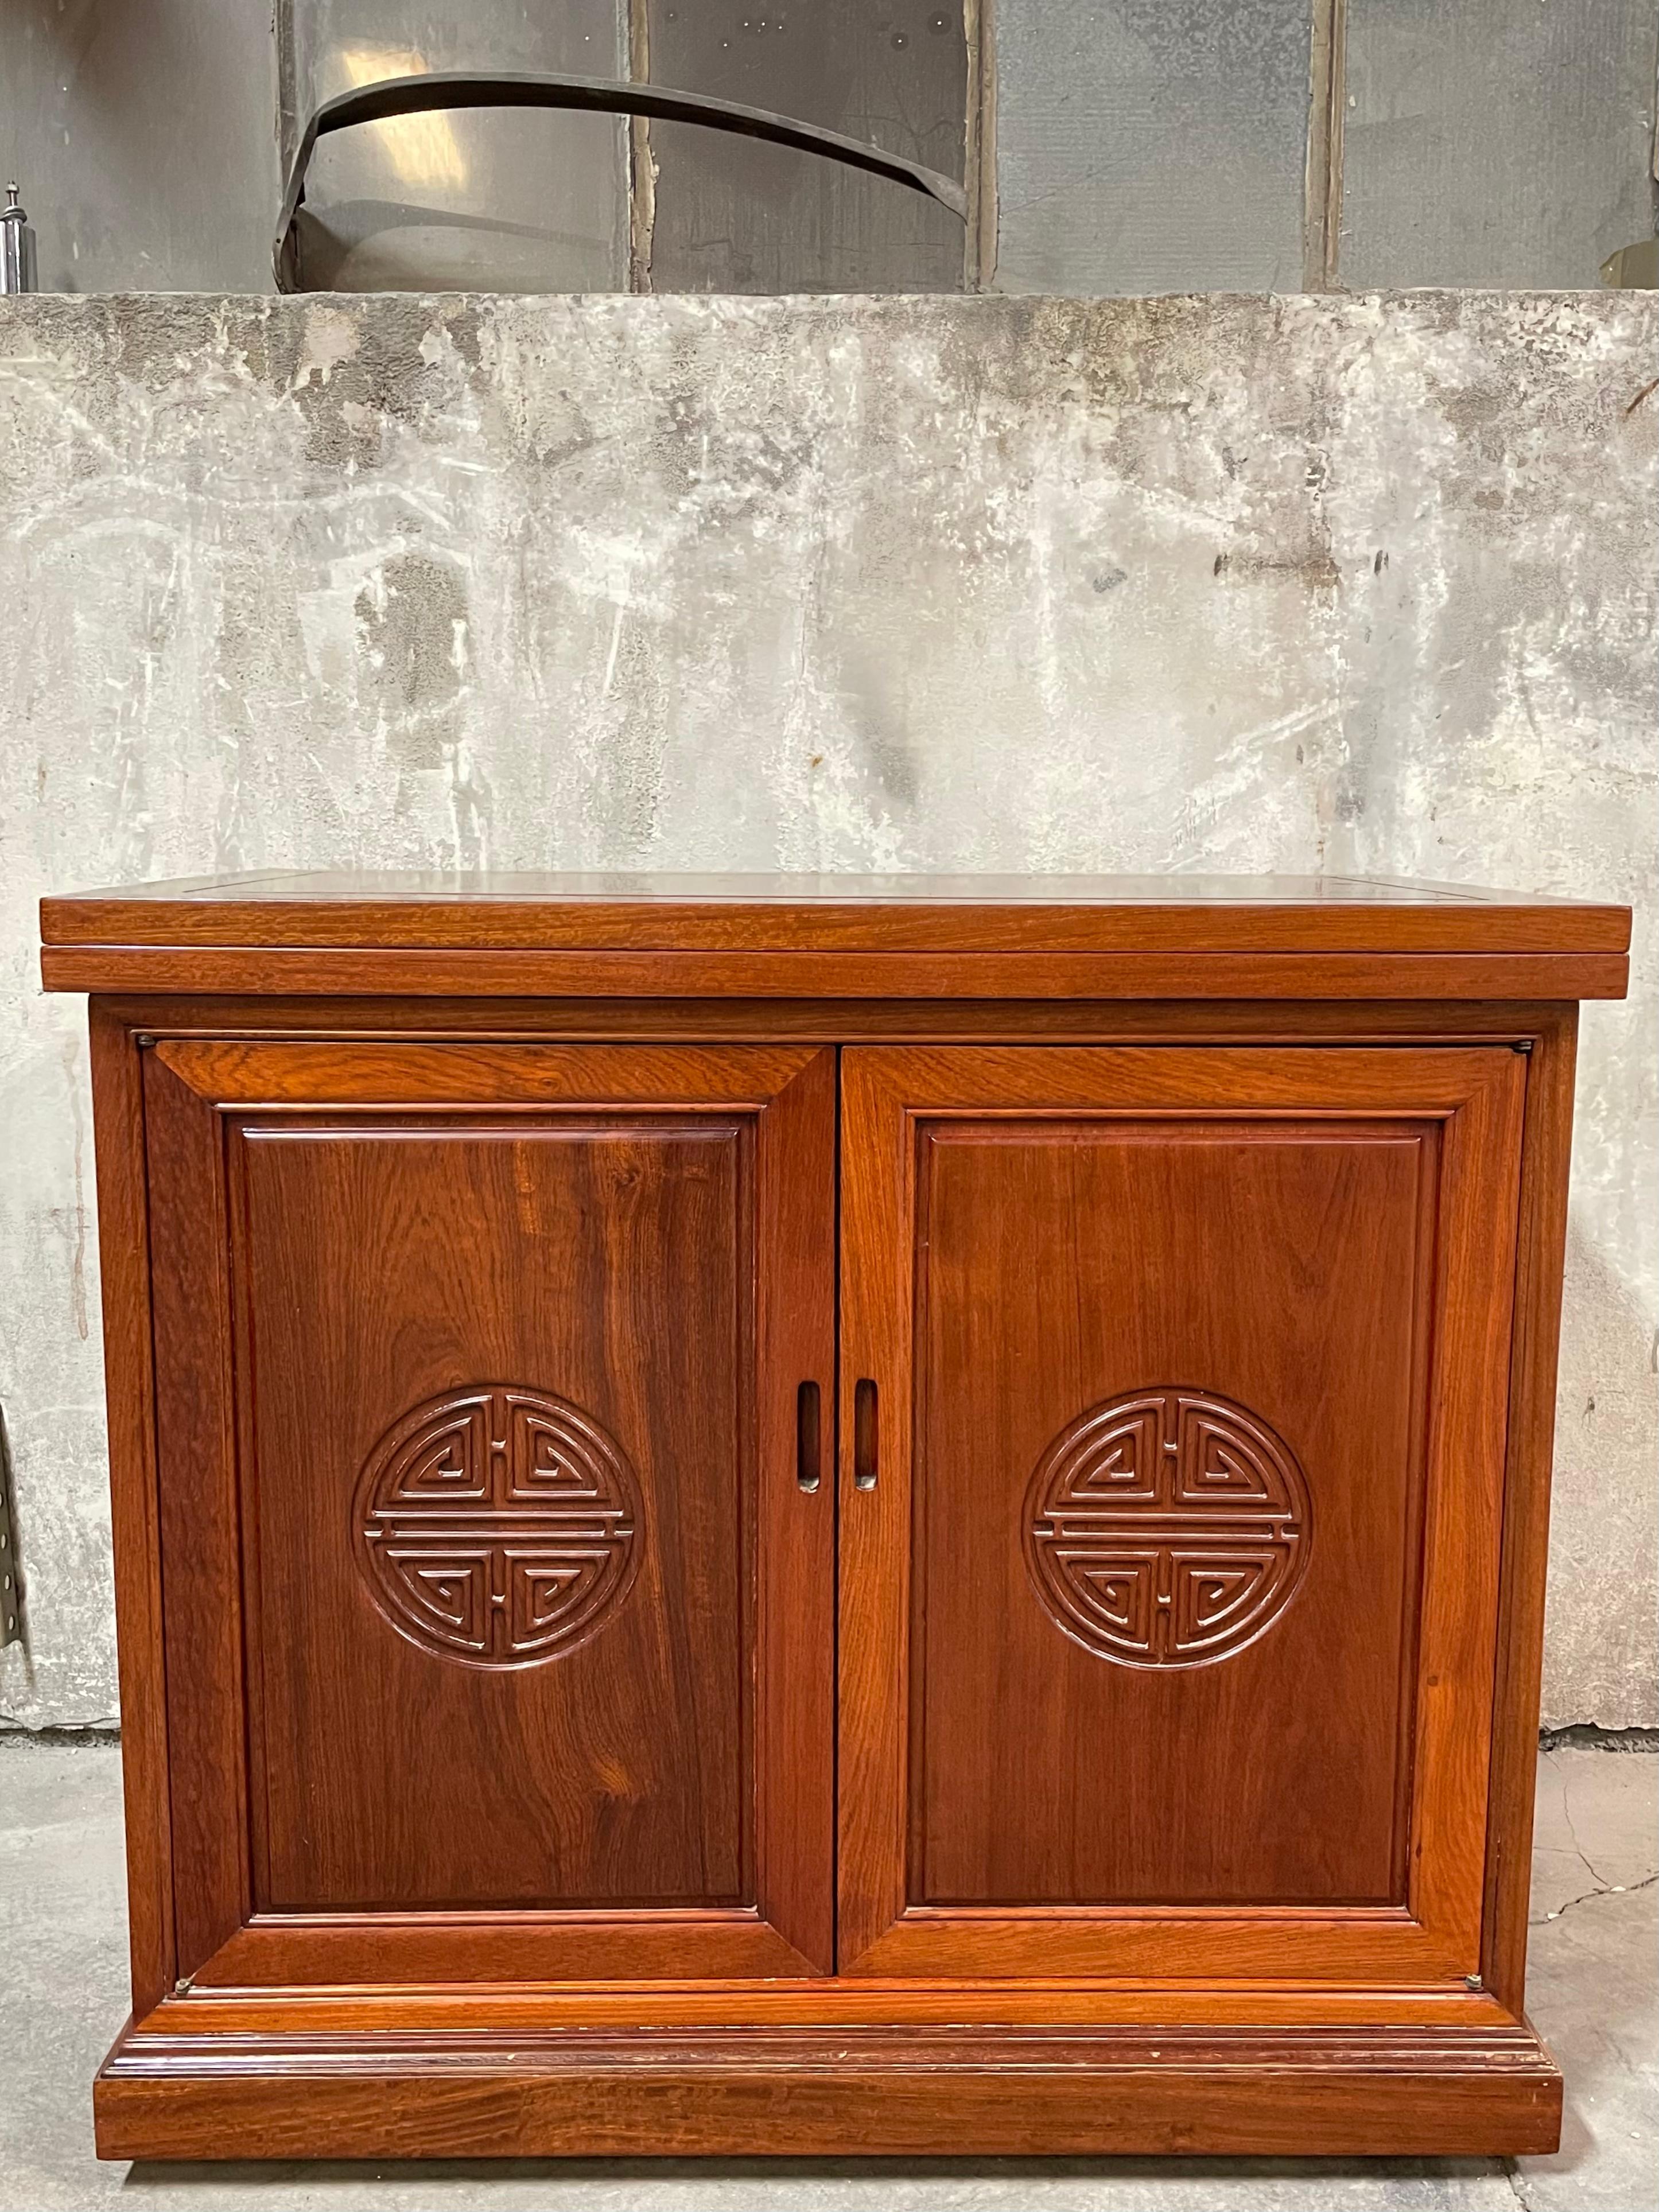 Fabulous mid century flip top server/bar by George Zee of Hong Kong. From the estate of an executive of the Ford Foundation. Purchased in Hong Kong while on business in the 1960’s.
Exceptional craftsmanship, solid as a rock. Double doors open to